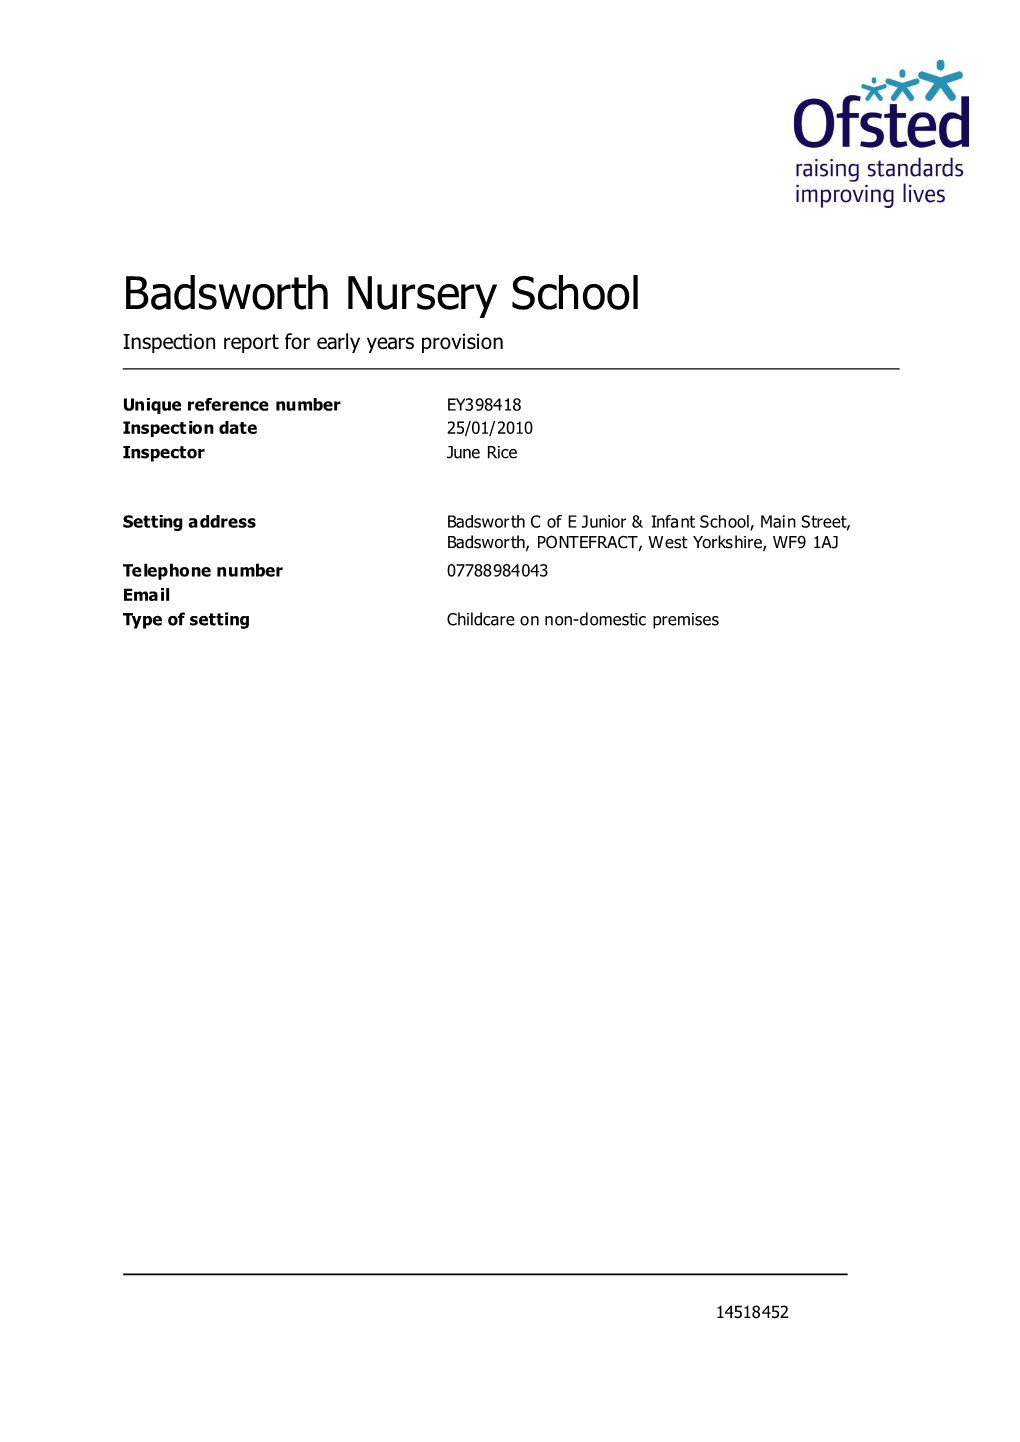 Badsworth Nursery School Inspection Report for Early Years Provision